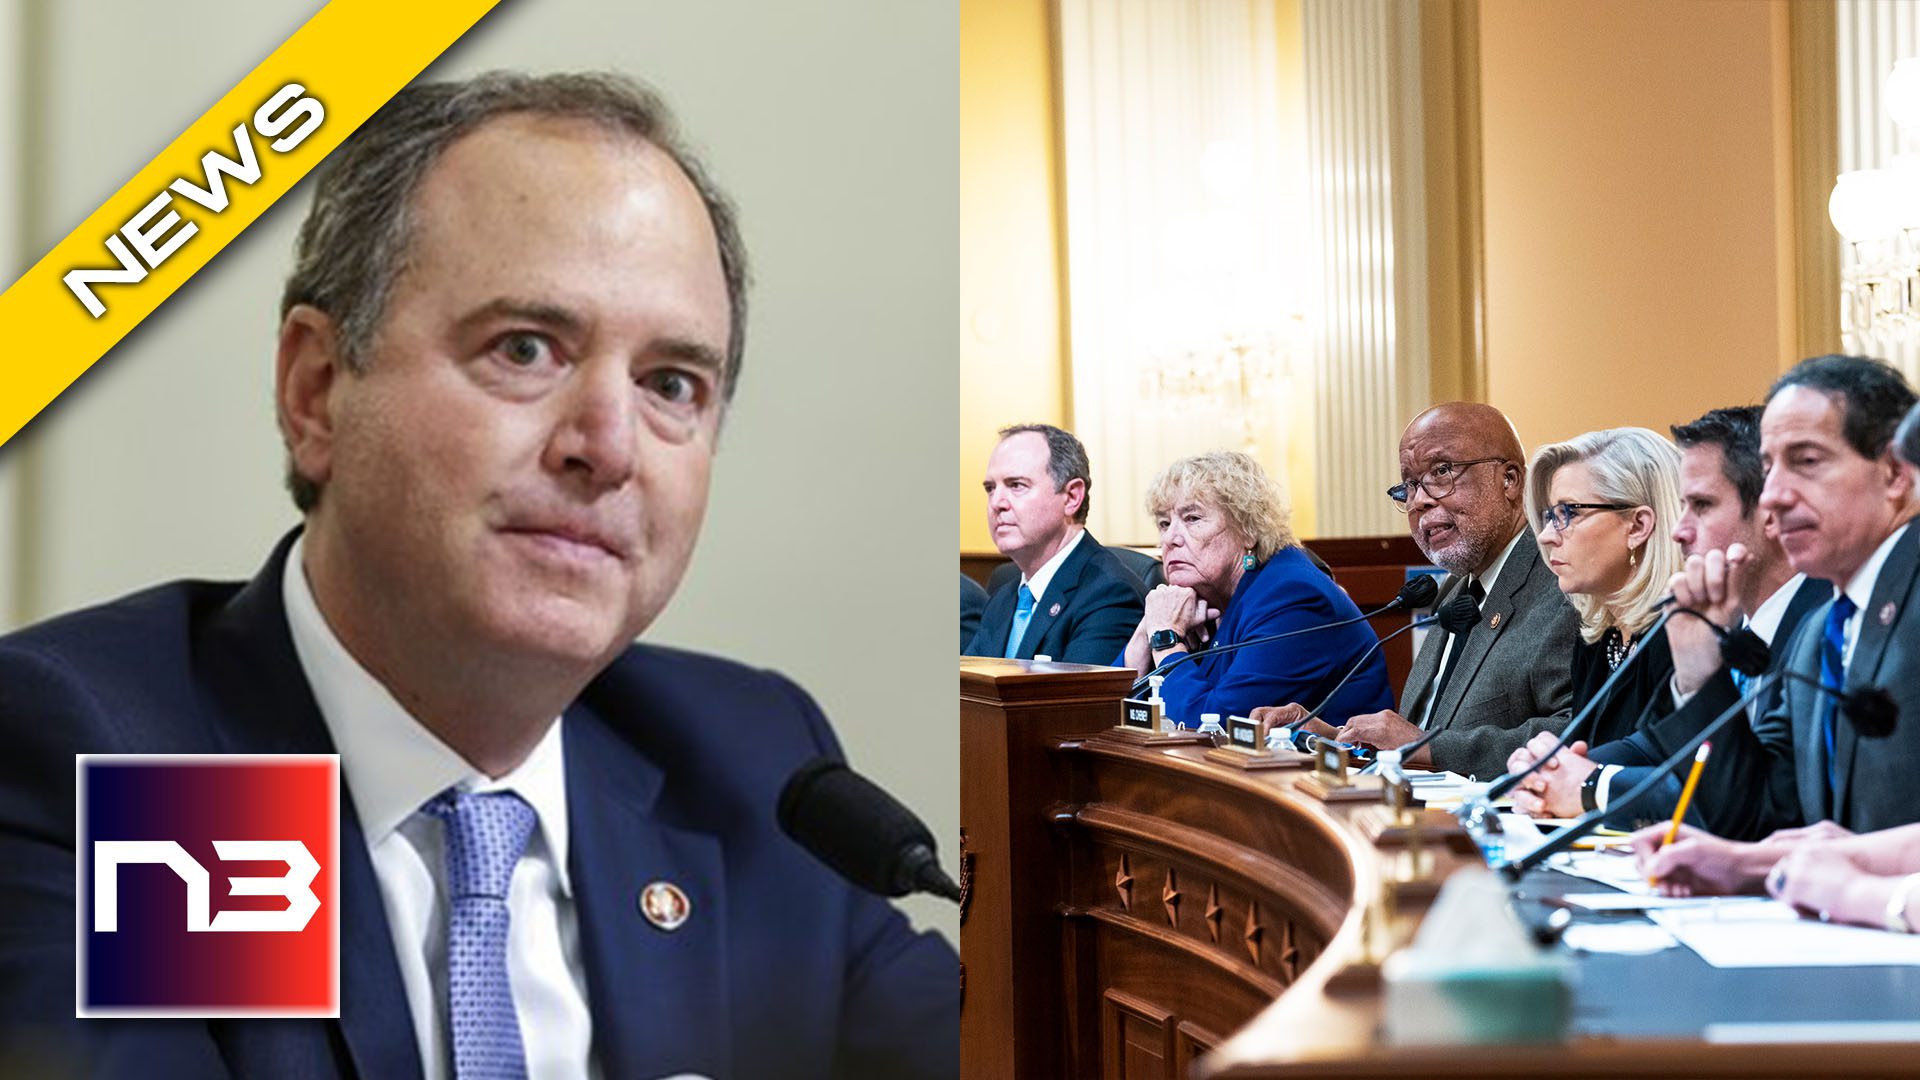 “Shifty” Schiff Makes Promise About Trump Raid That Will Only Make Matters Worse